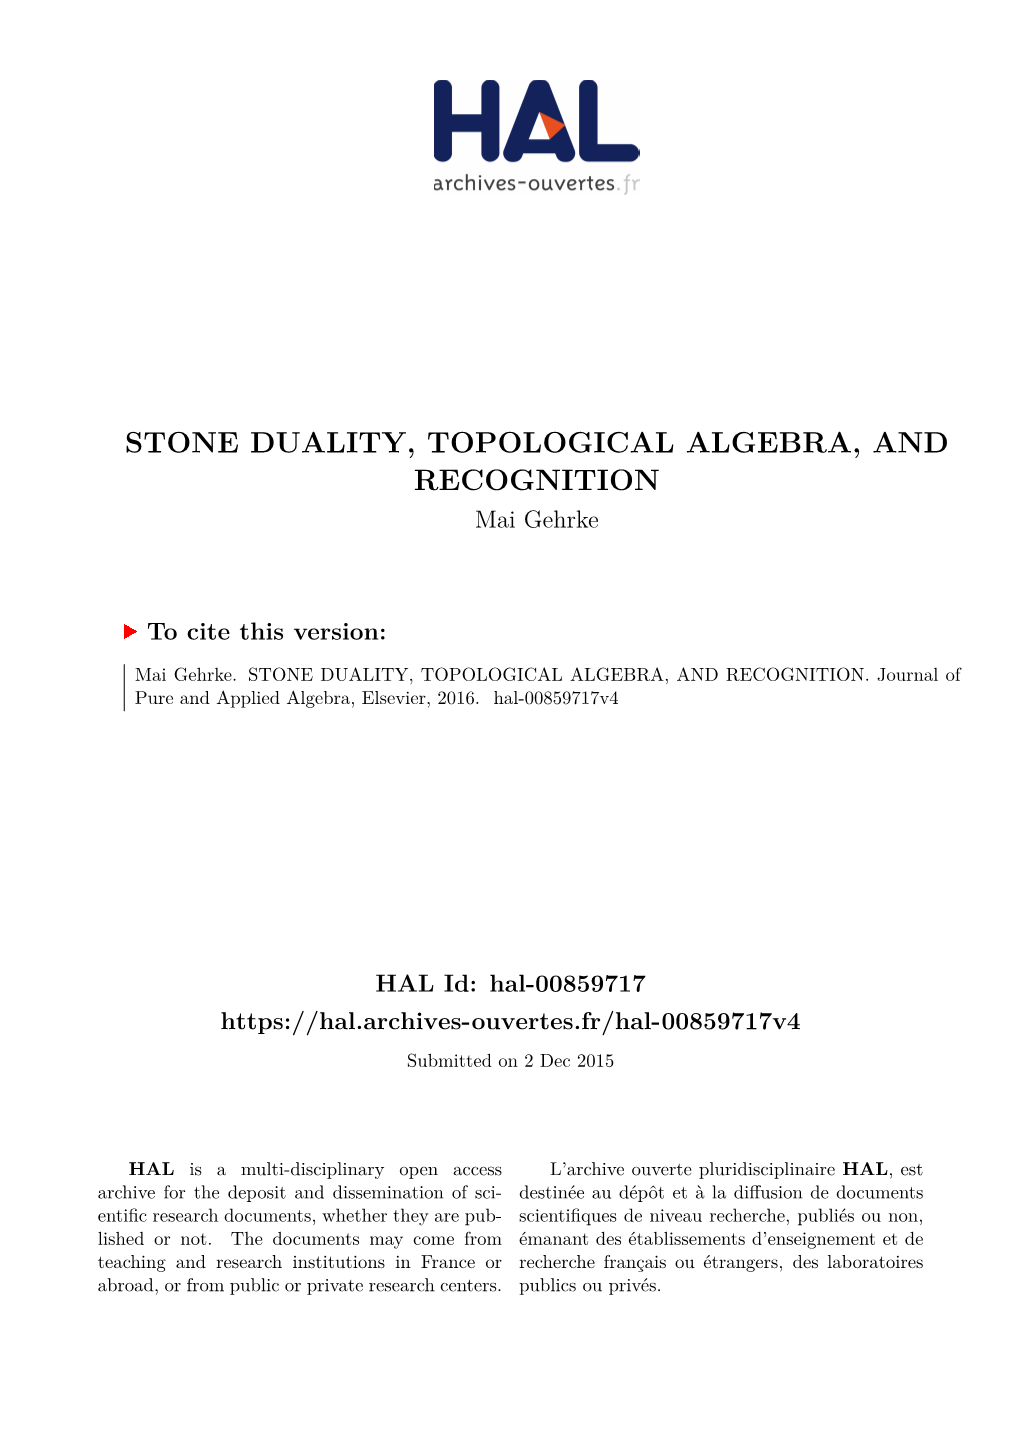 STONE DUALITY, TOPOLOGICAL ALGEBRA, and RECOGNITION Mai Gehrke